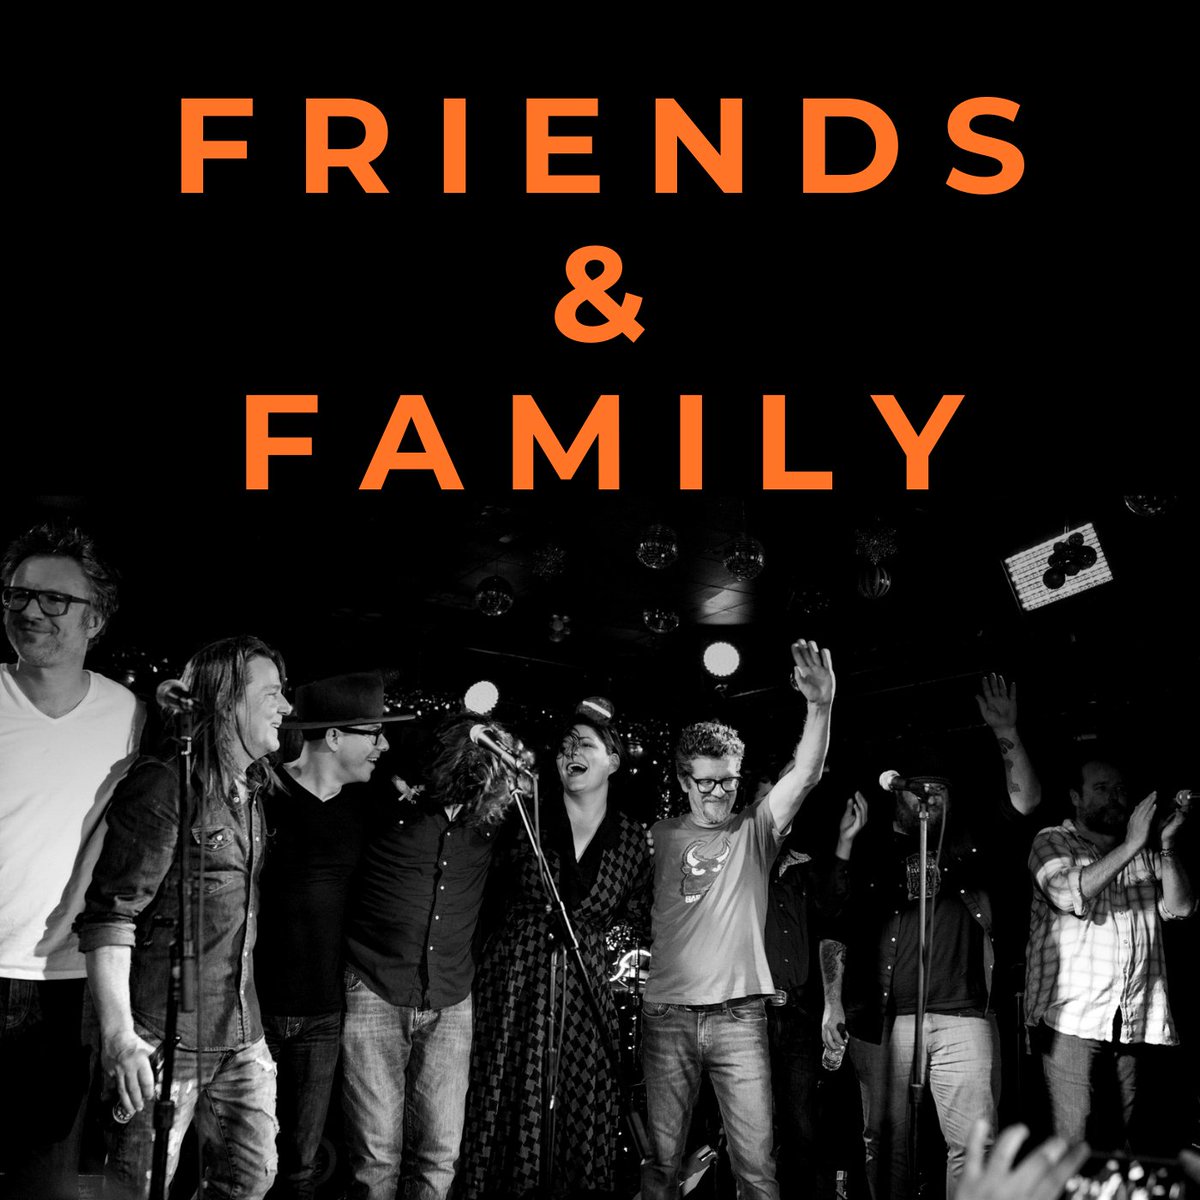 Hi All, We’ve freshened up our Friends and Family playlist in time for what will hopefully be a restful and peaceful Thanksgiving weekend with loved ones. ow.ly/xbKm50PTFS8